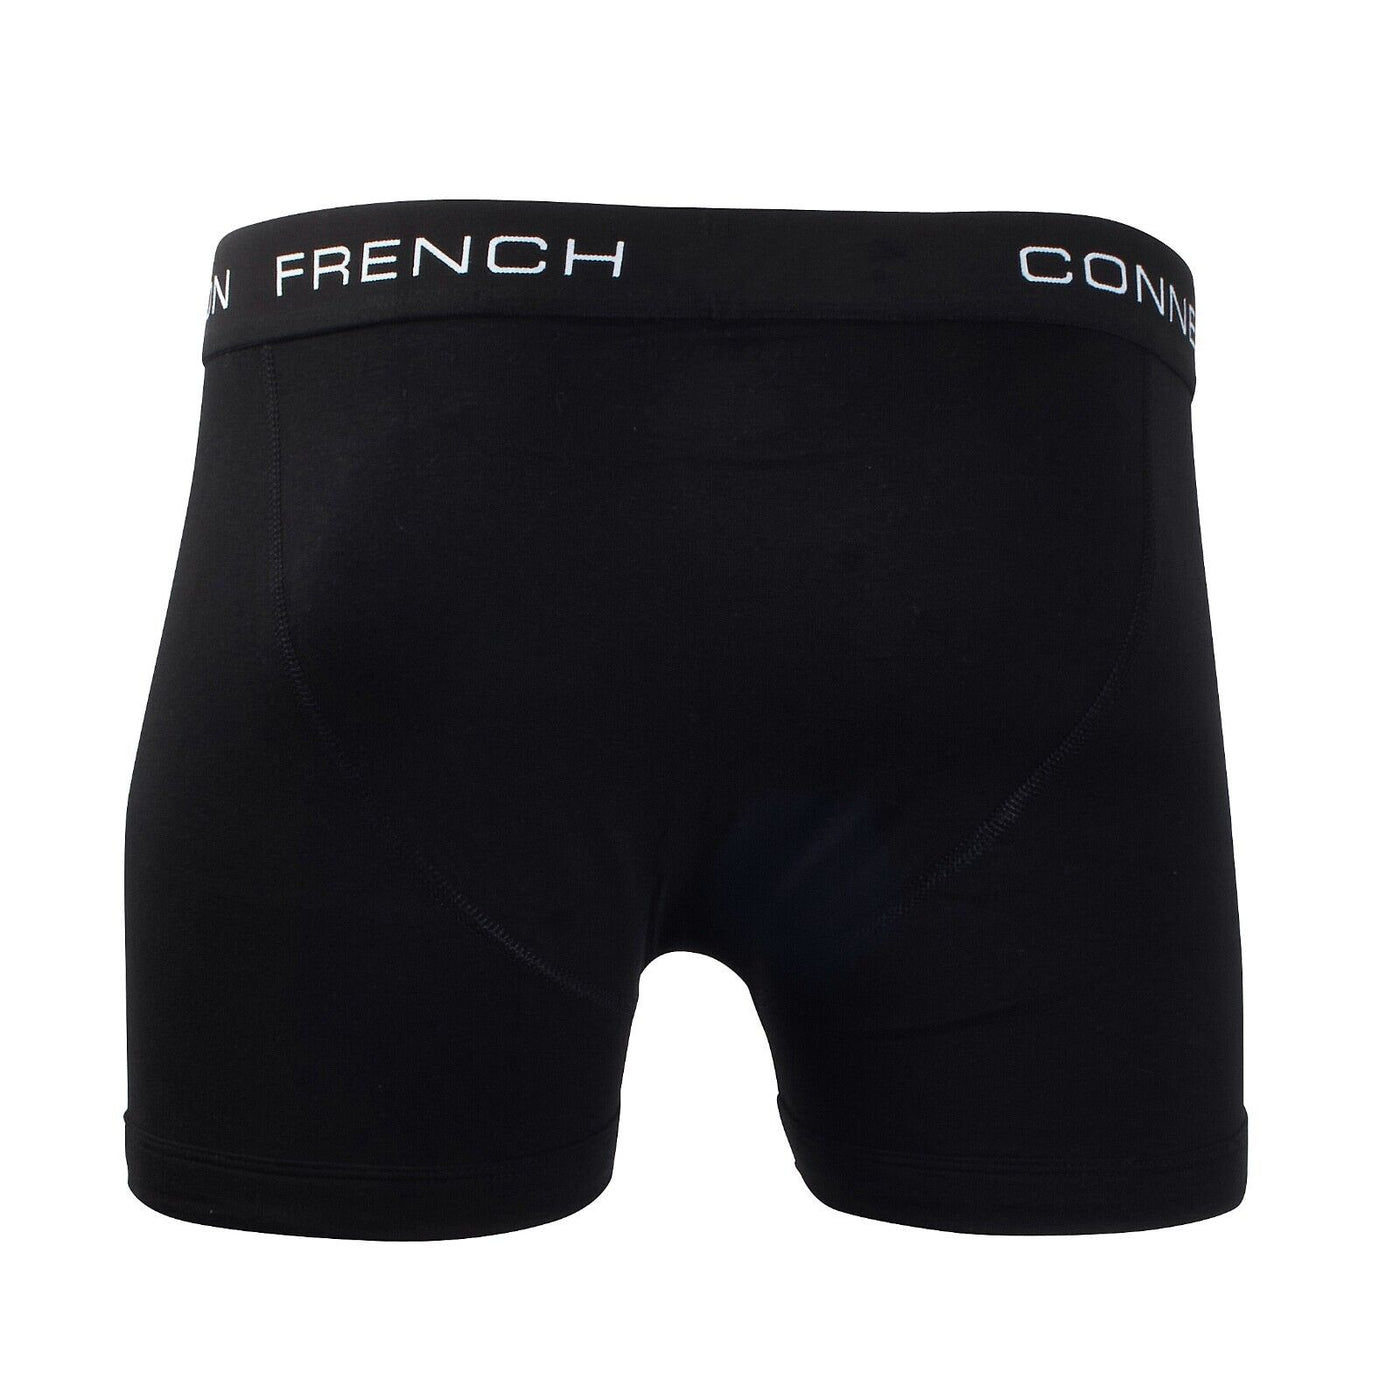 French Connection Men's White & Black 2 Pack Boxer Briefs